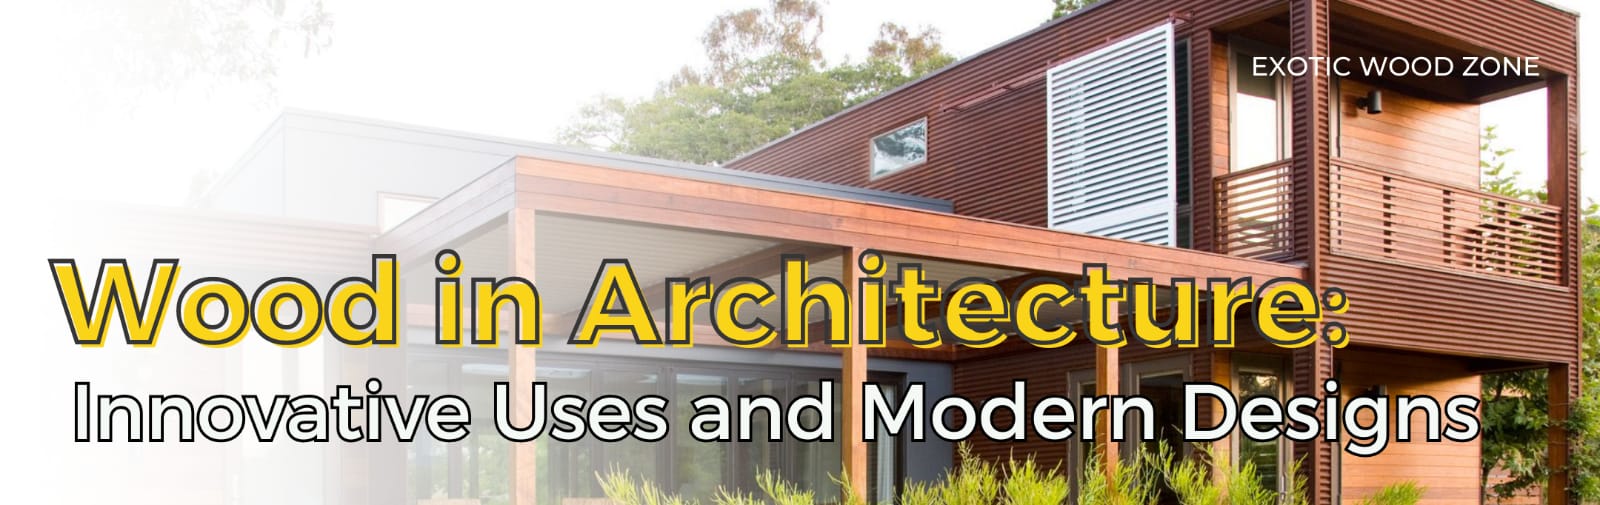 Wood in Architecture: Innovative Uses and Modern Designs